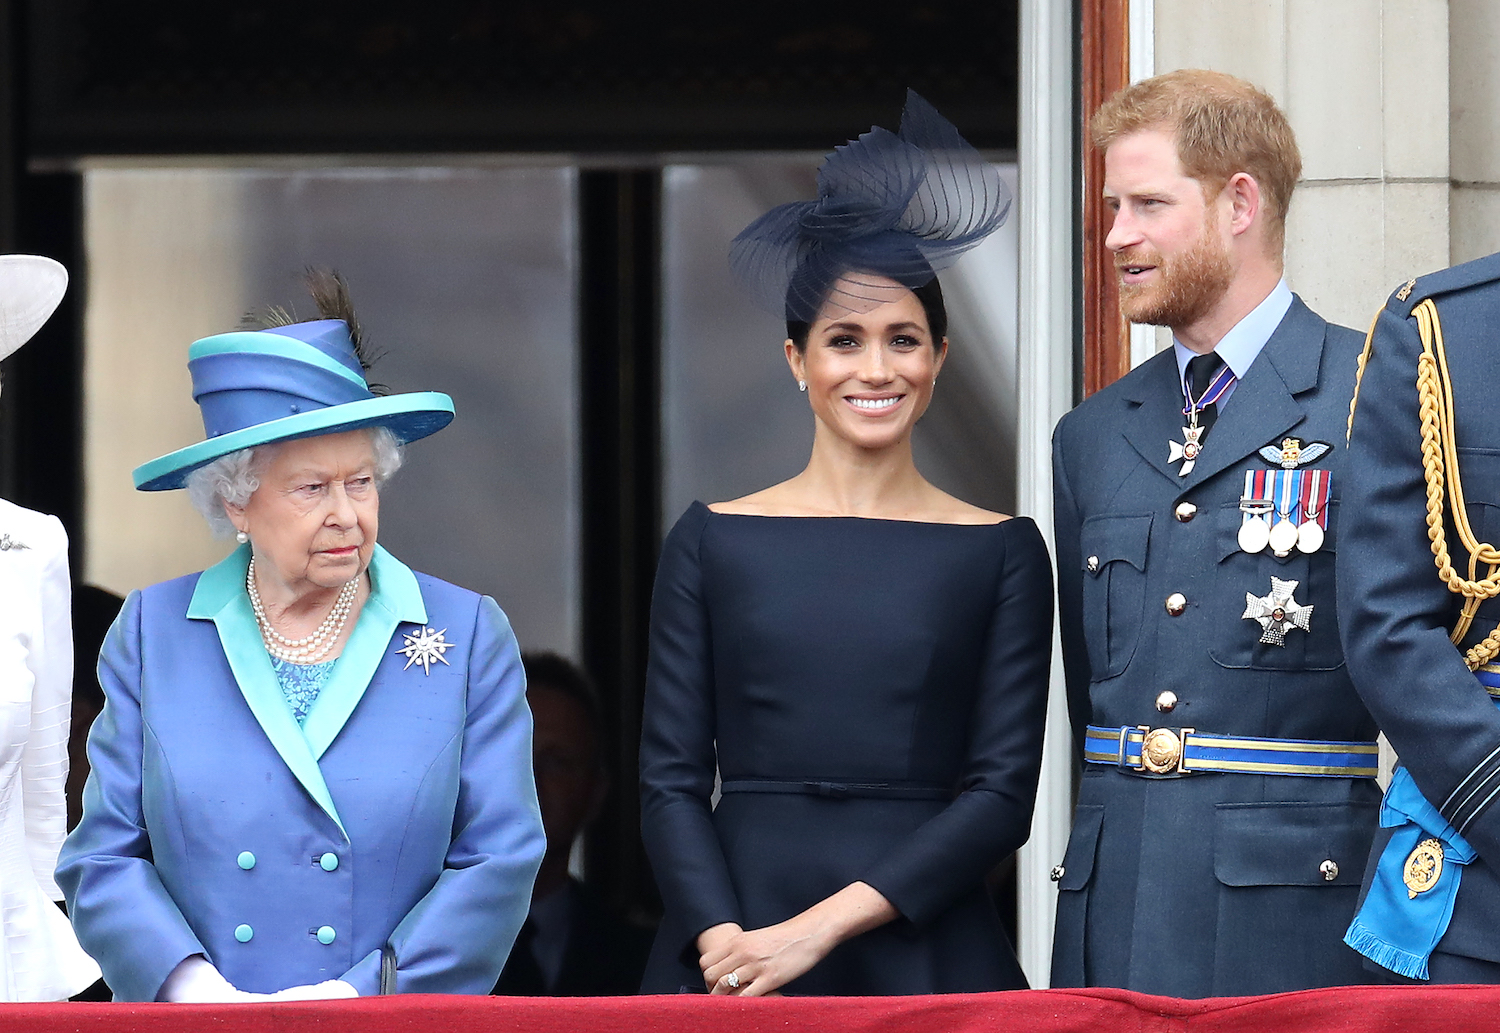 Queen Elizabeth II, Prince Harry, and Meghan Markle on the balcony of Buckingham Palace for the Centenary of the RAF on July 10, 2018